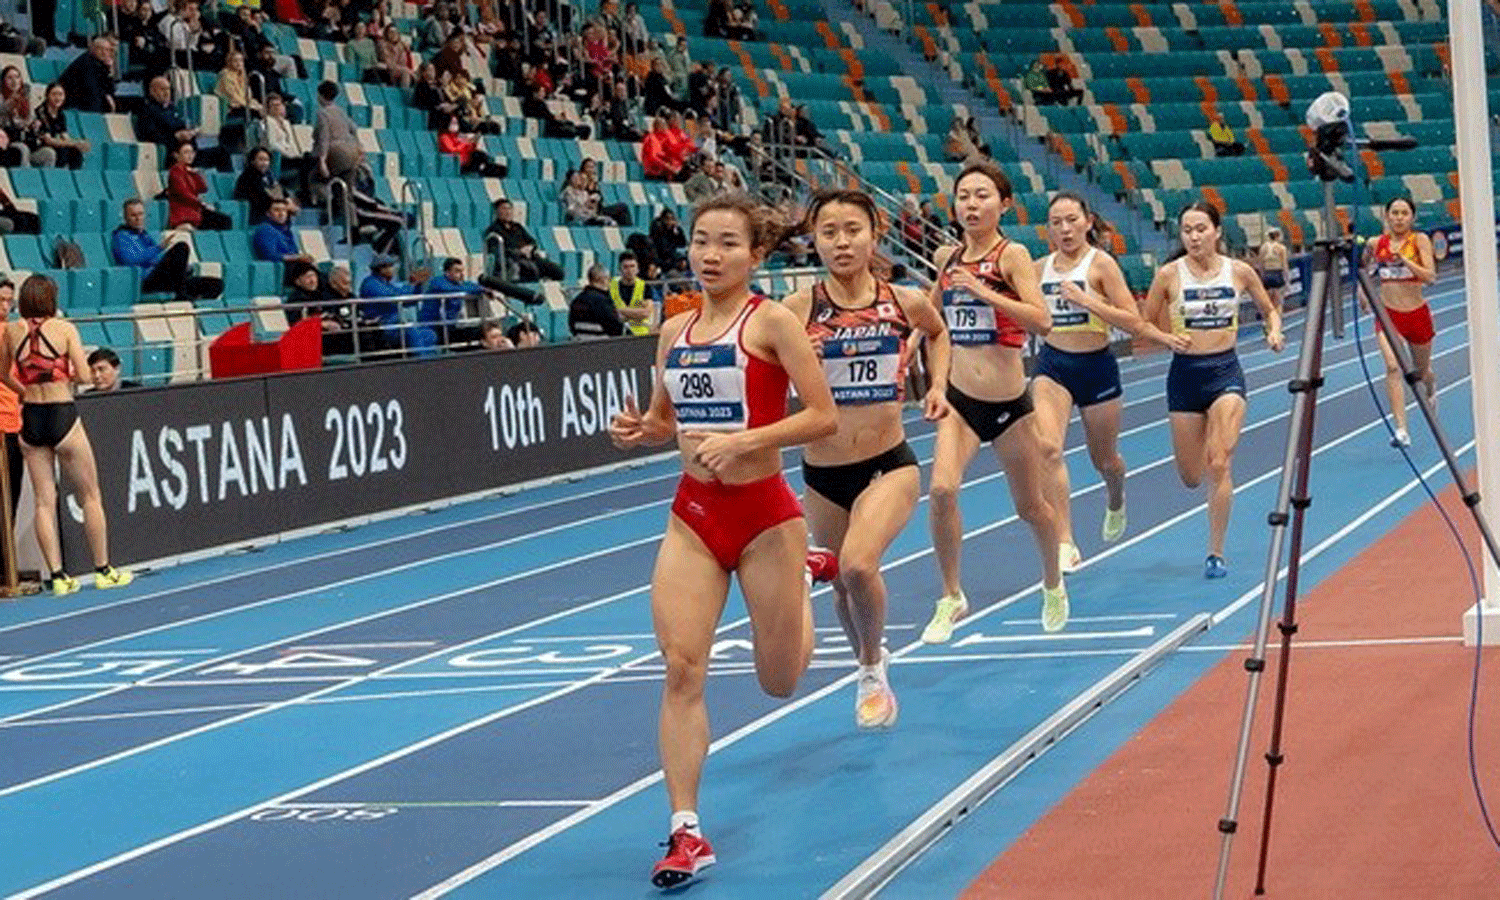 Nguyen Thi Oanh secures the medal gold in the women’s 1,500-metre event. (Photo: VNA).